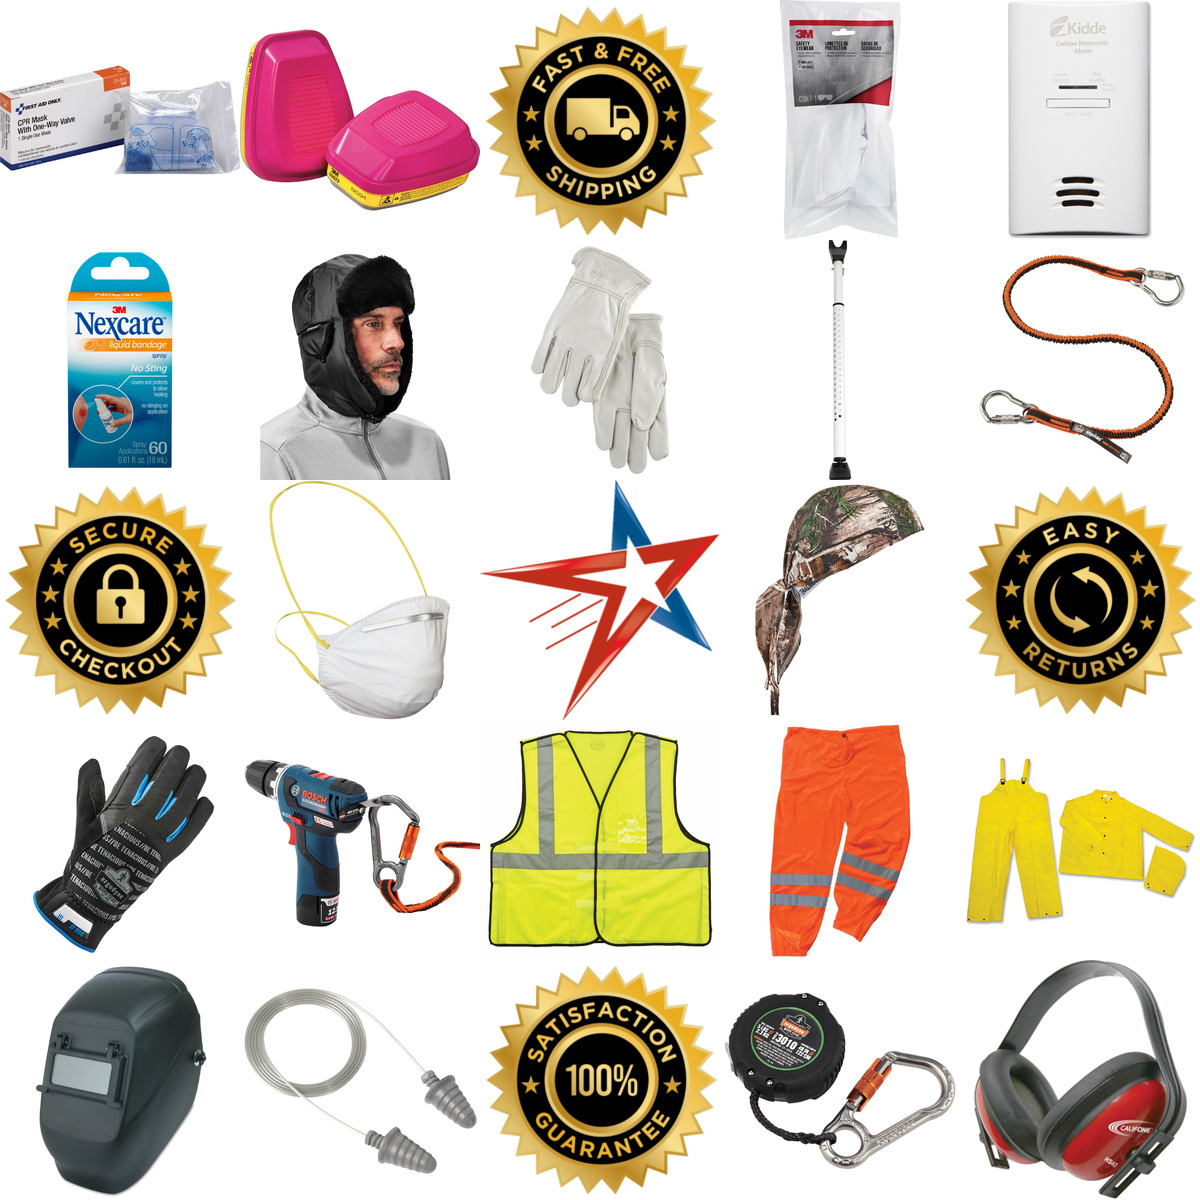 A selection of Safety and Security products on GoVets